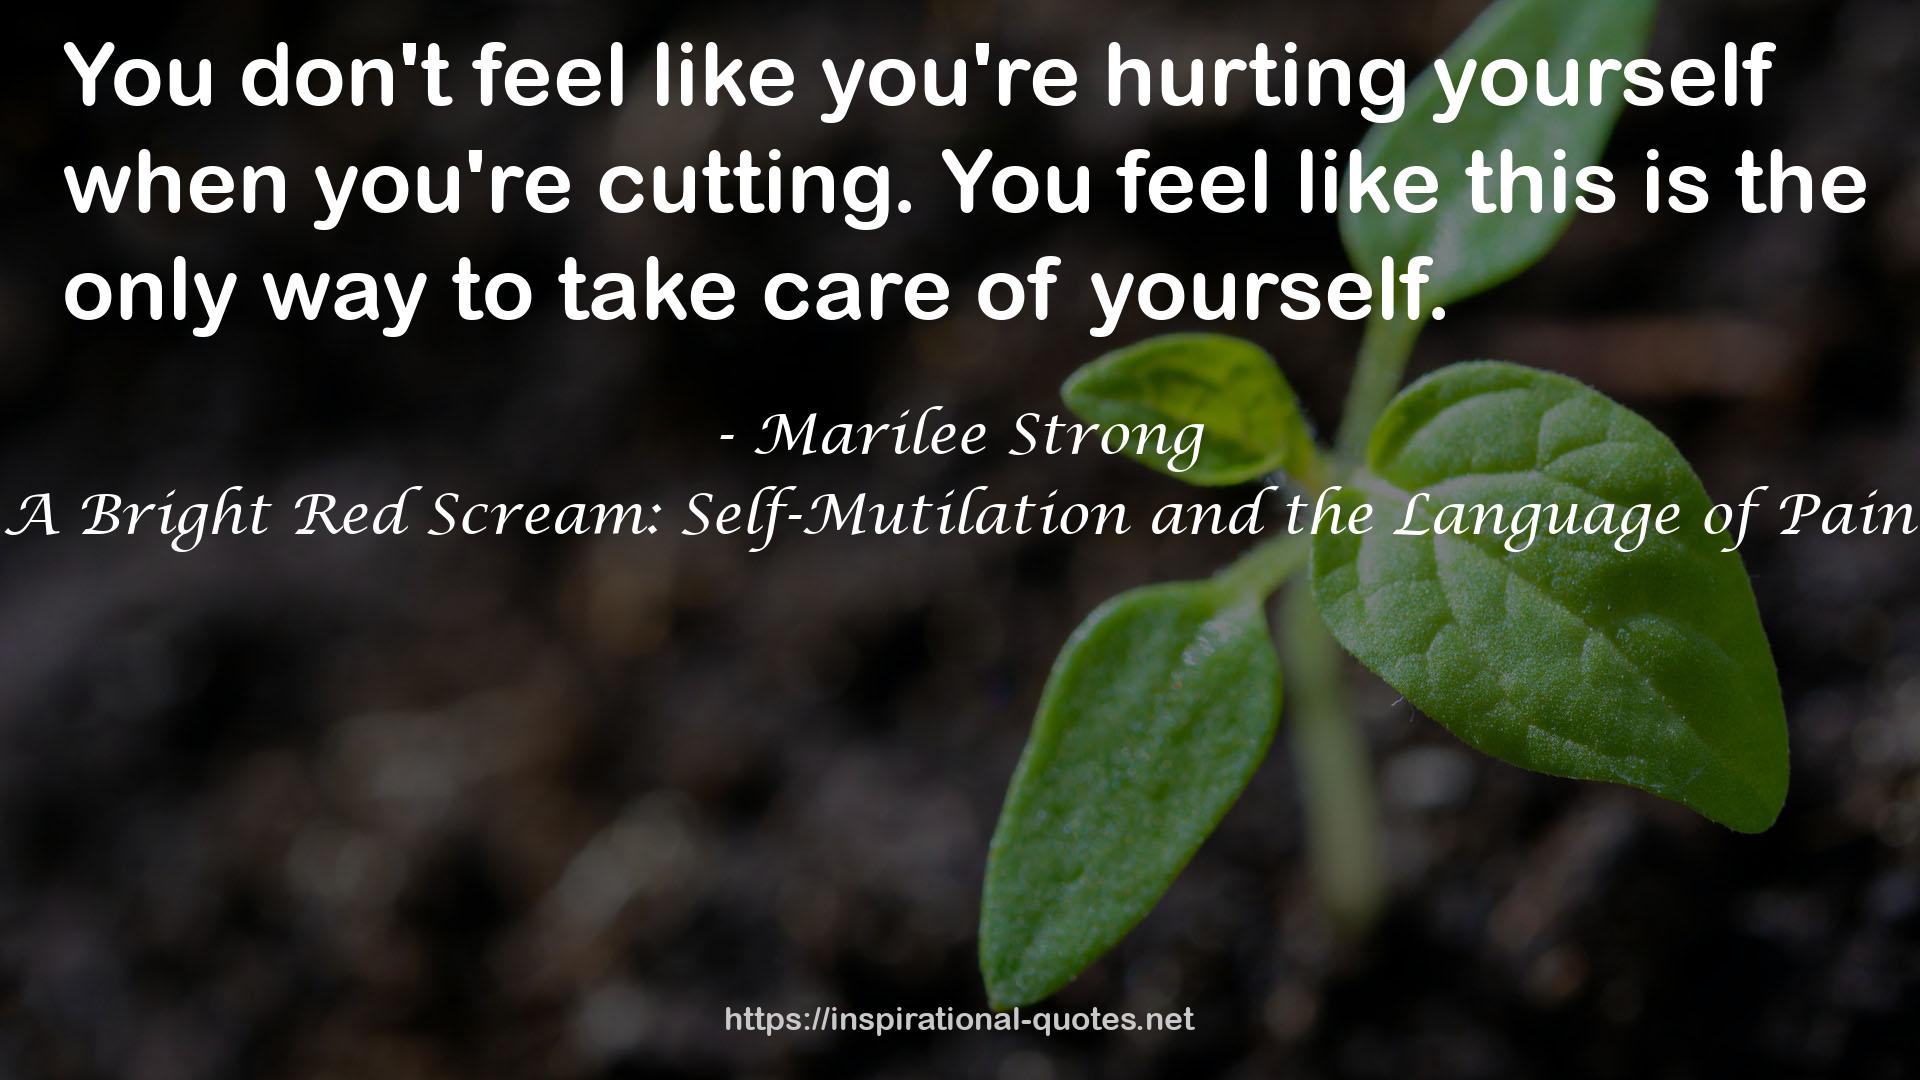 Marilee Strong QUOTES